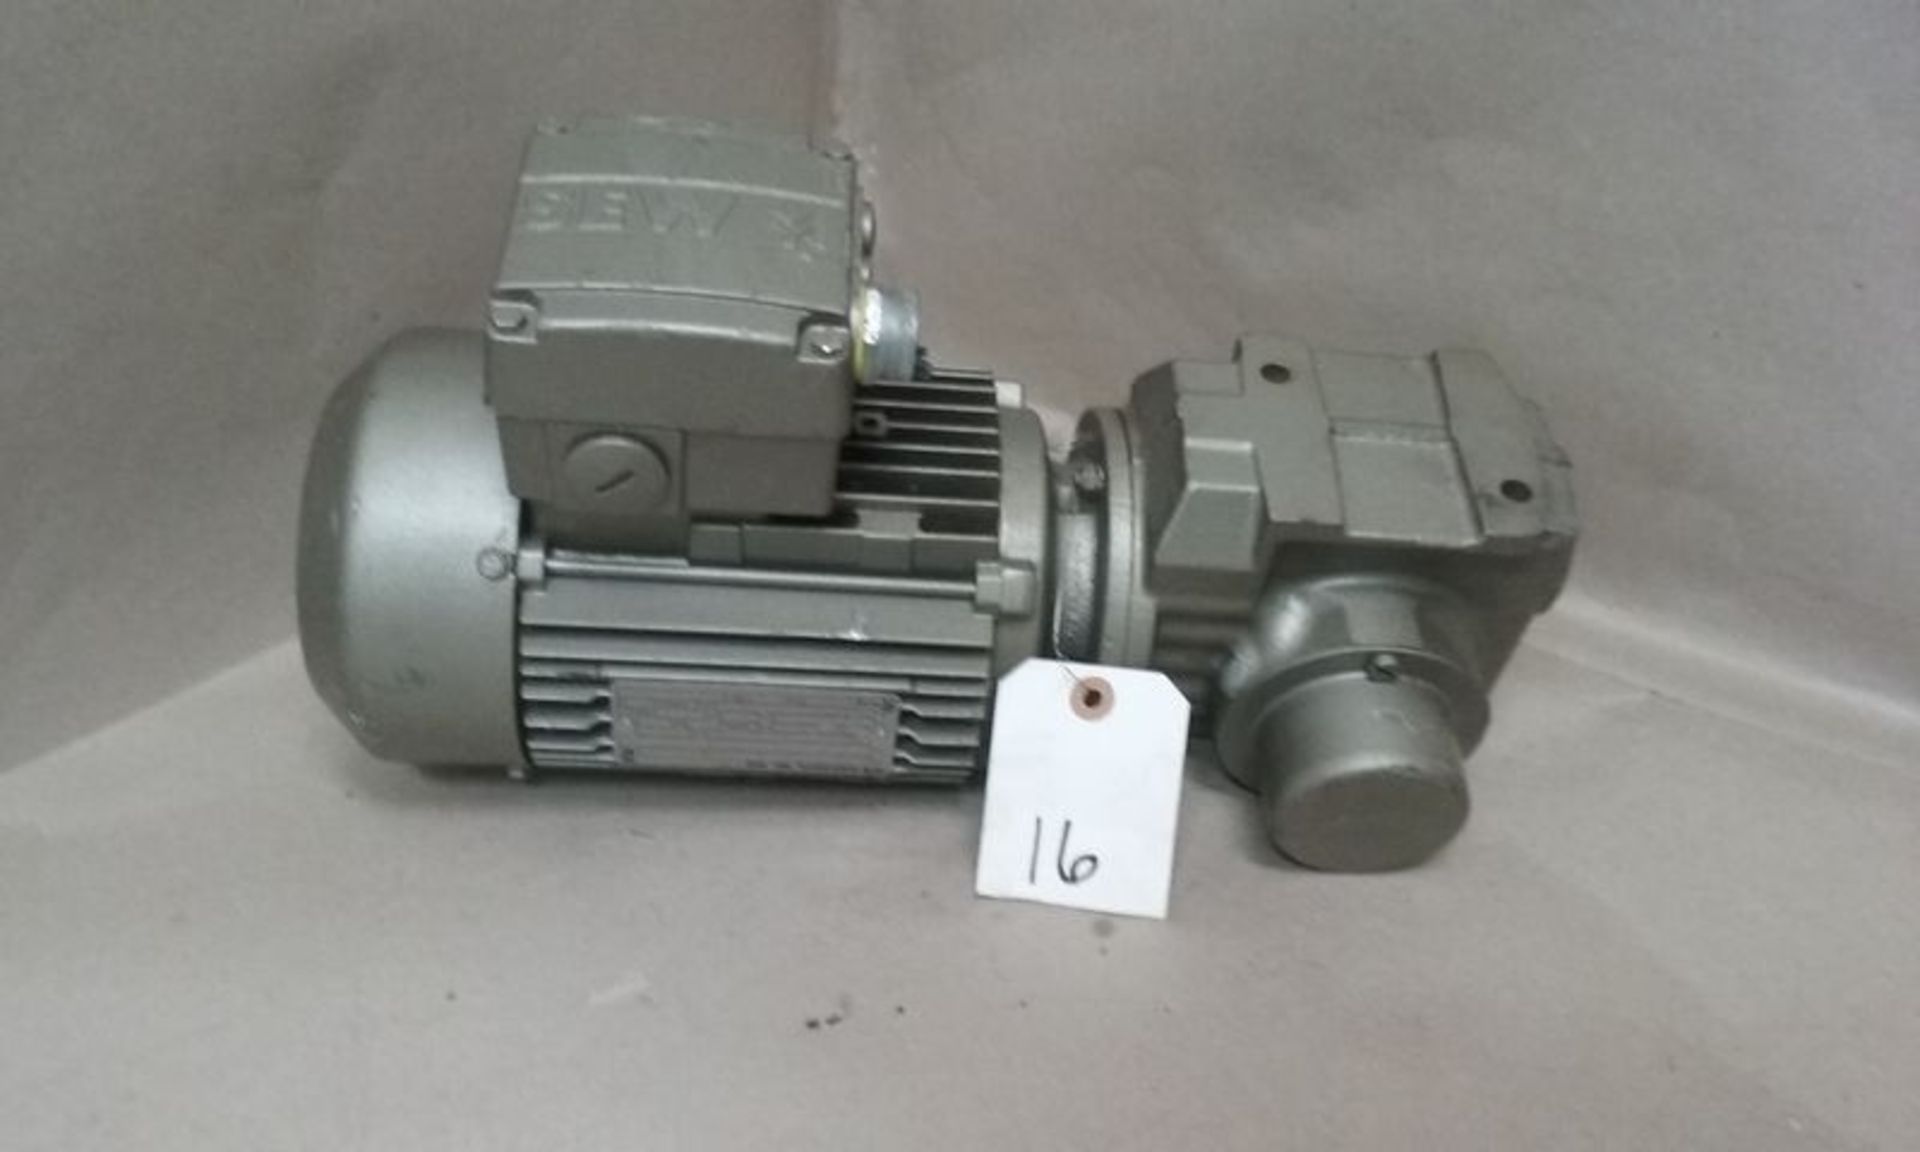 SEW EURODRIVE 1 HP RIGHT ANGLE GEAR DRIVE - Image 6 of 6